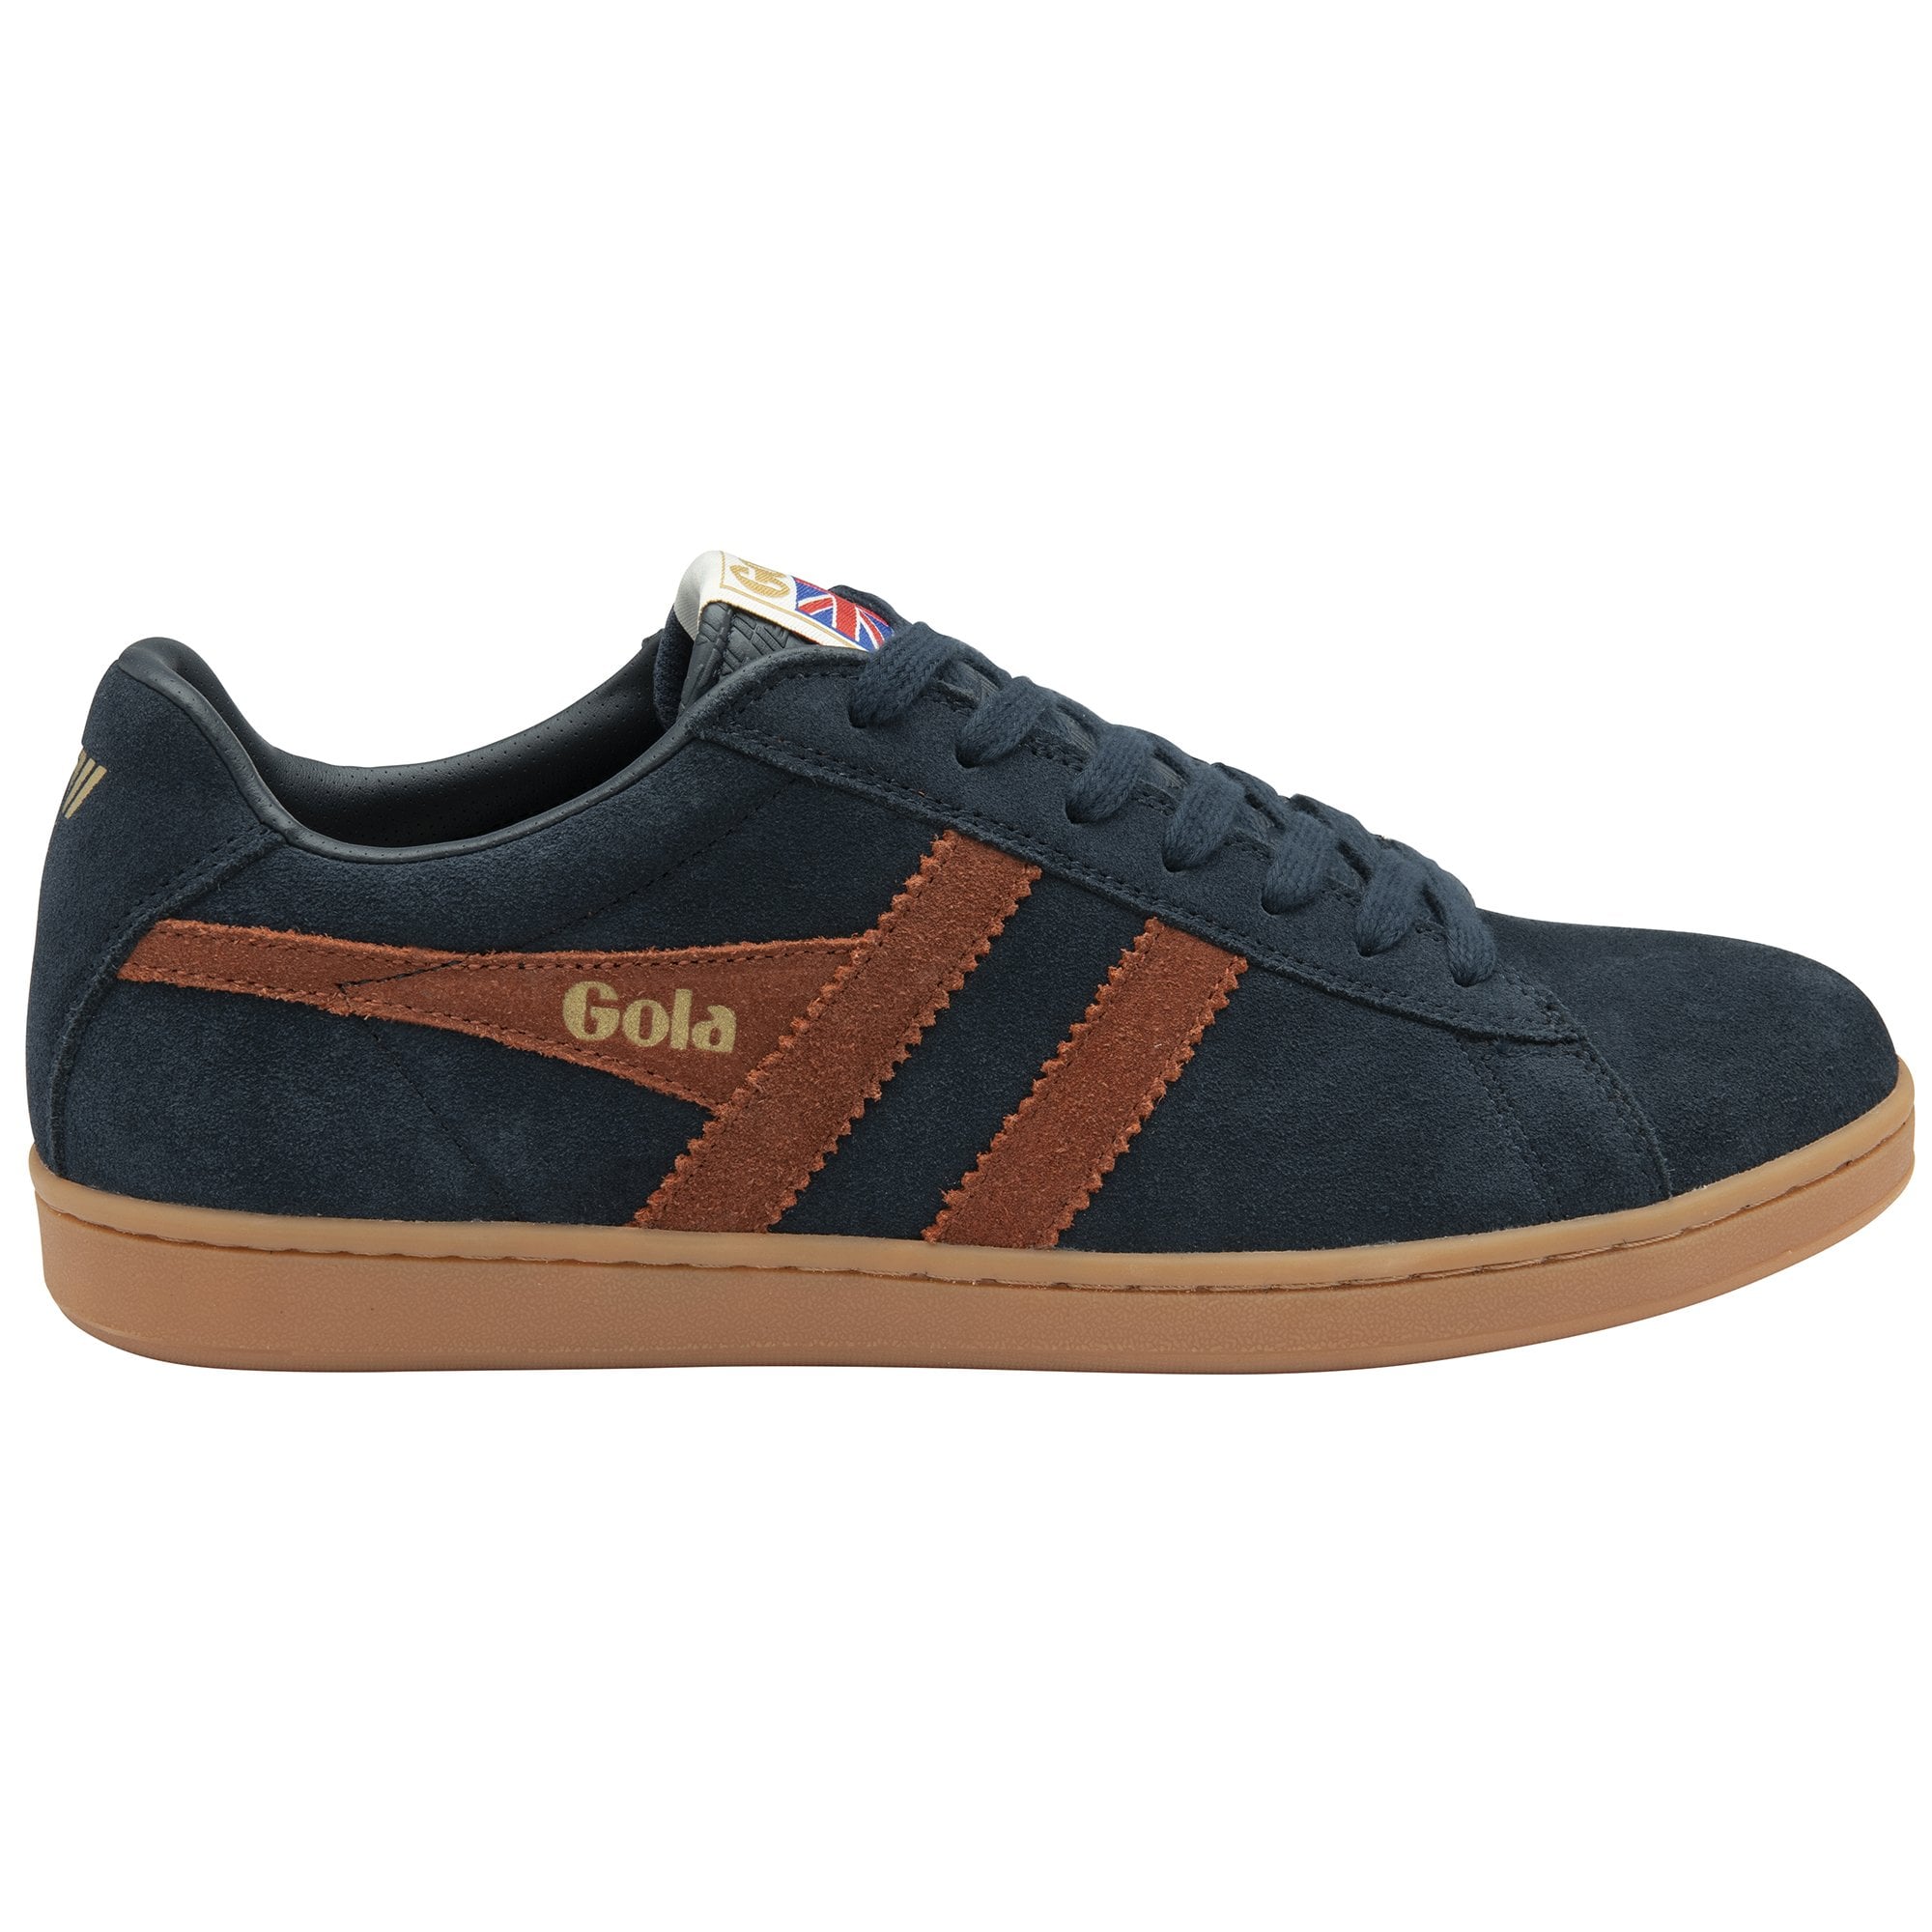 Gola Equipe Mens Navy Suede Lace Up Trainers